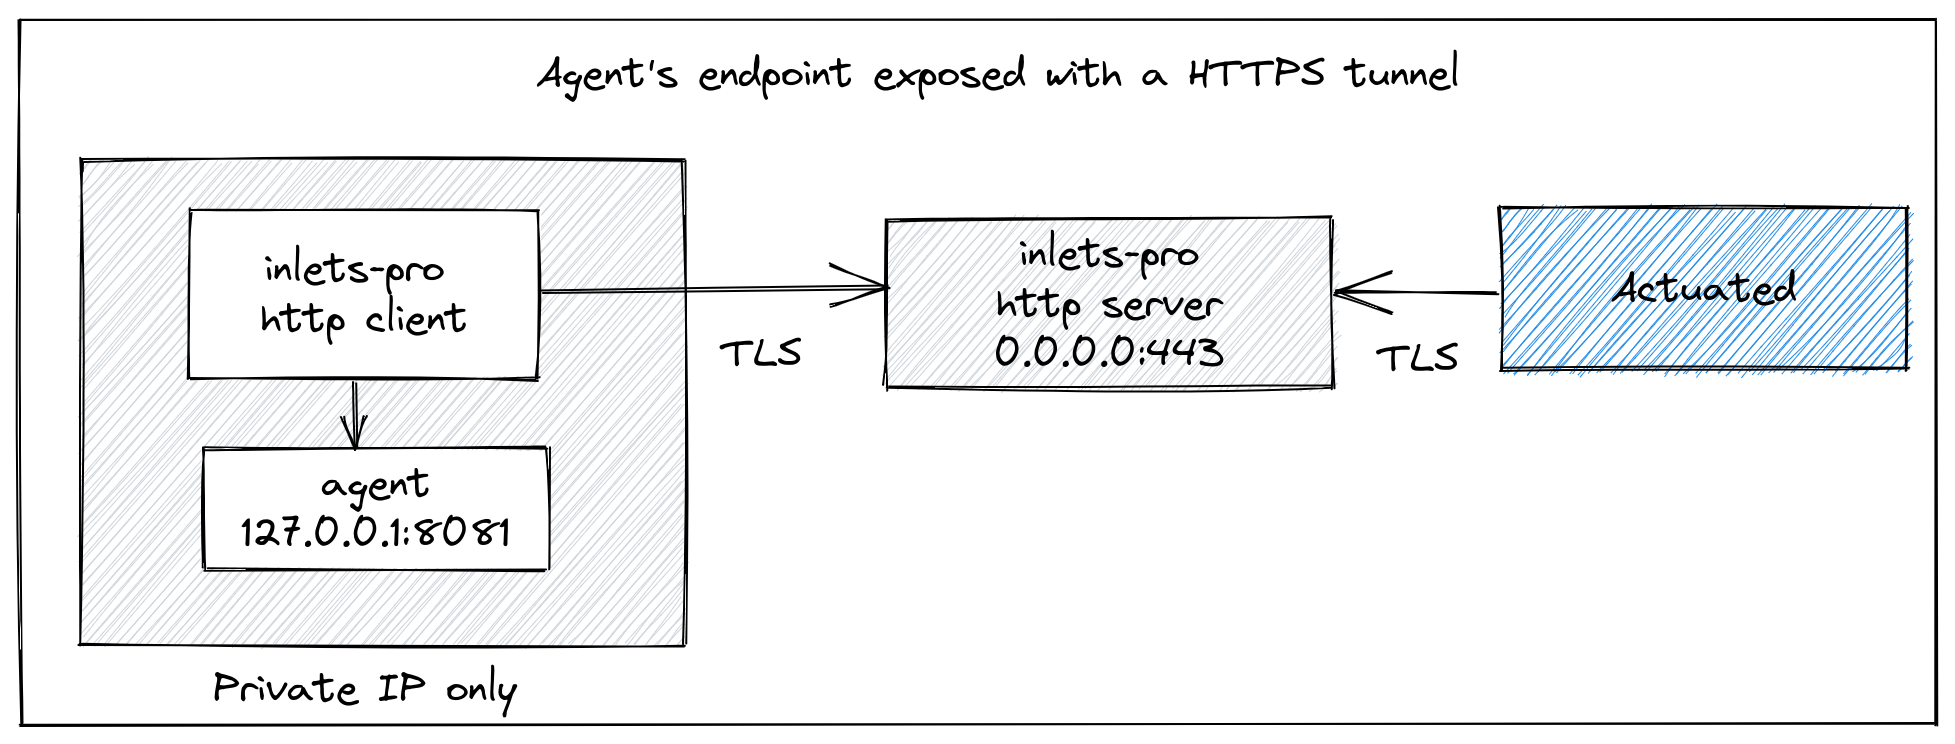 Accessing the agent's private endpoint using an inlets-pro tunnel